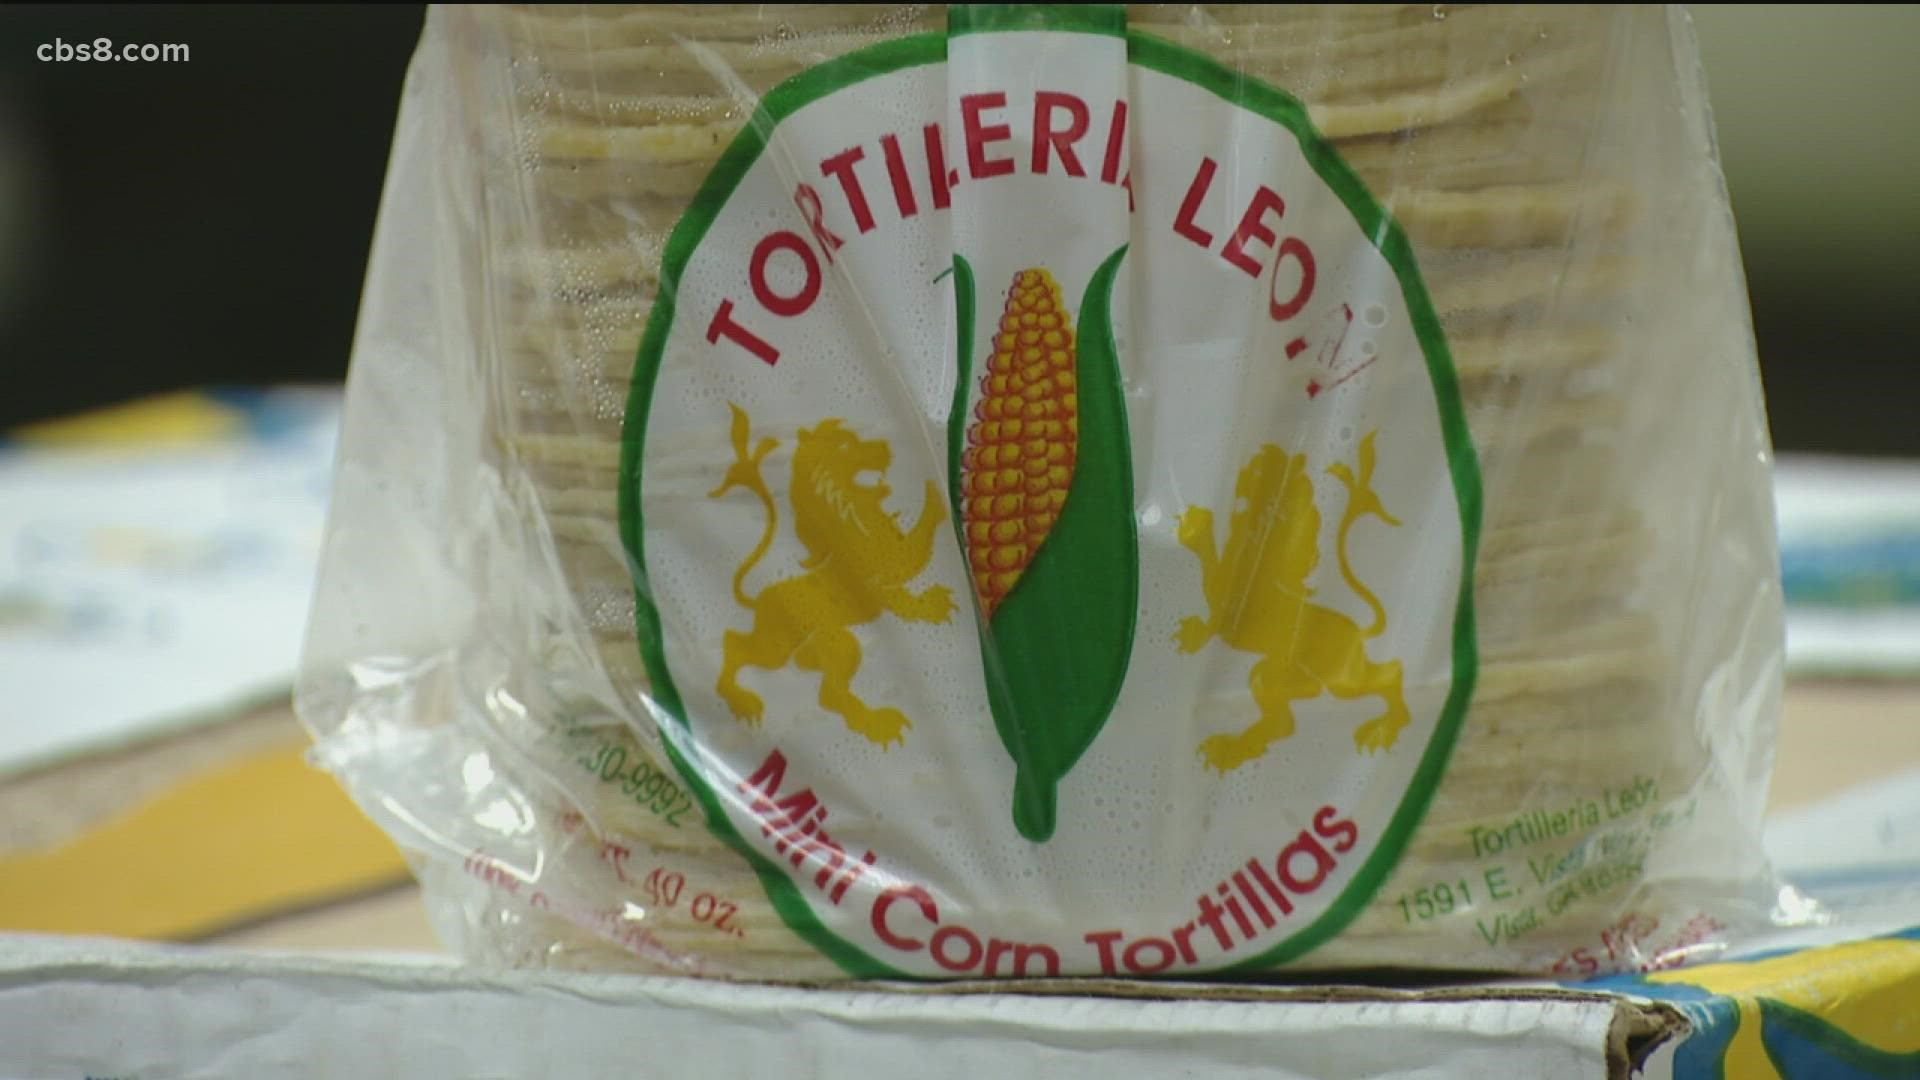 It's a family-owned business in Vista. They distribute tortillas to restaurants, but they also have their own store where you can see the tortillas being made.